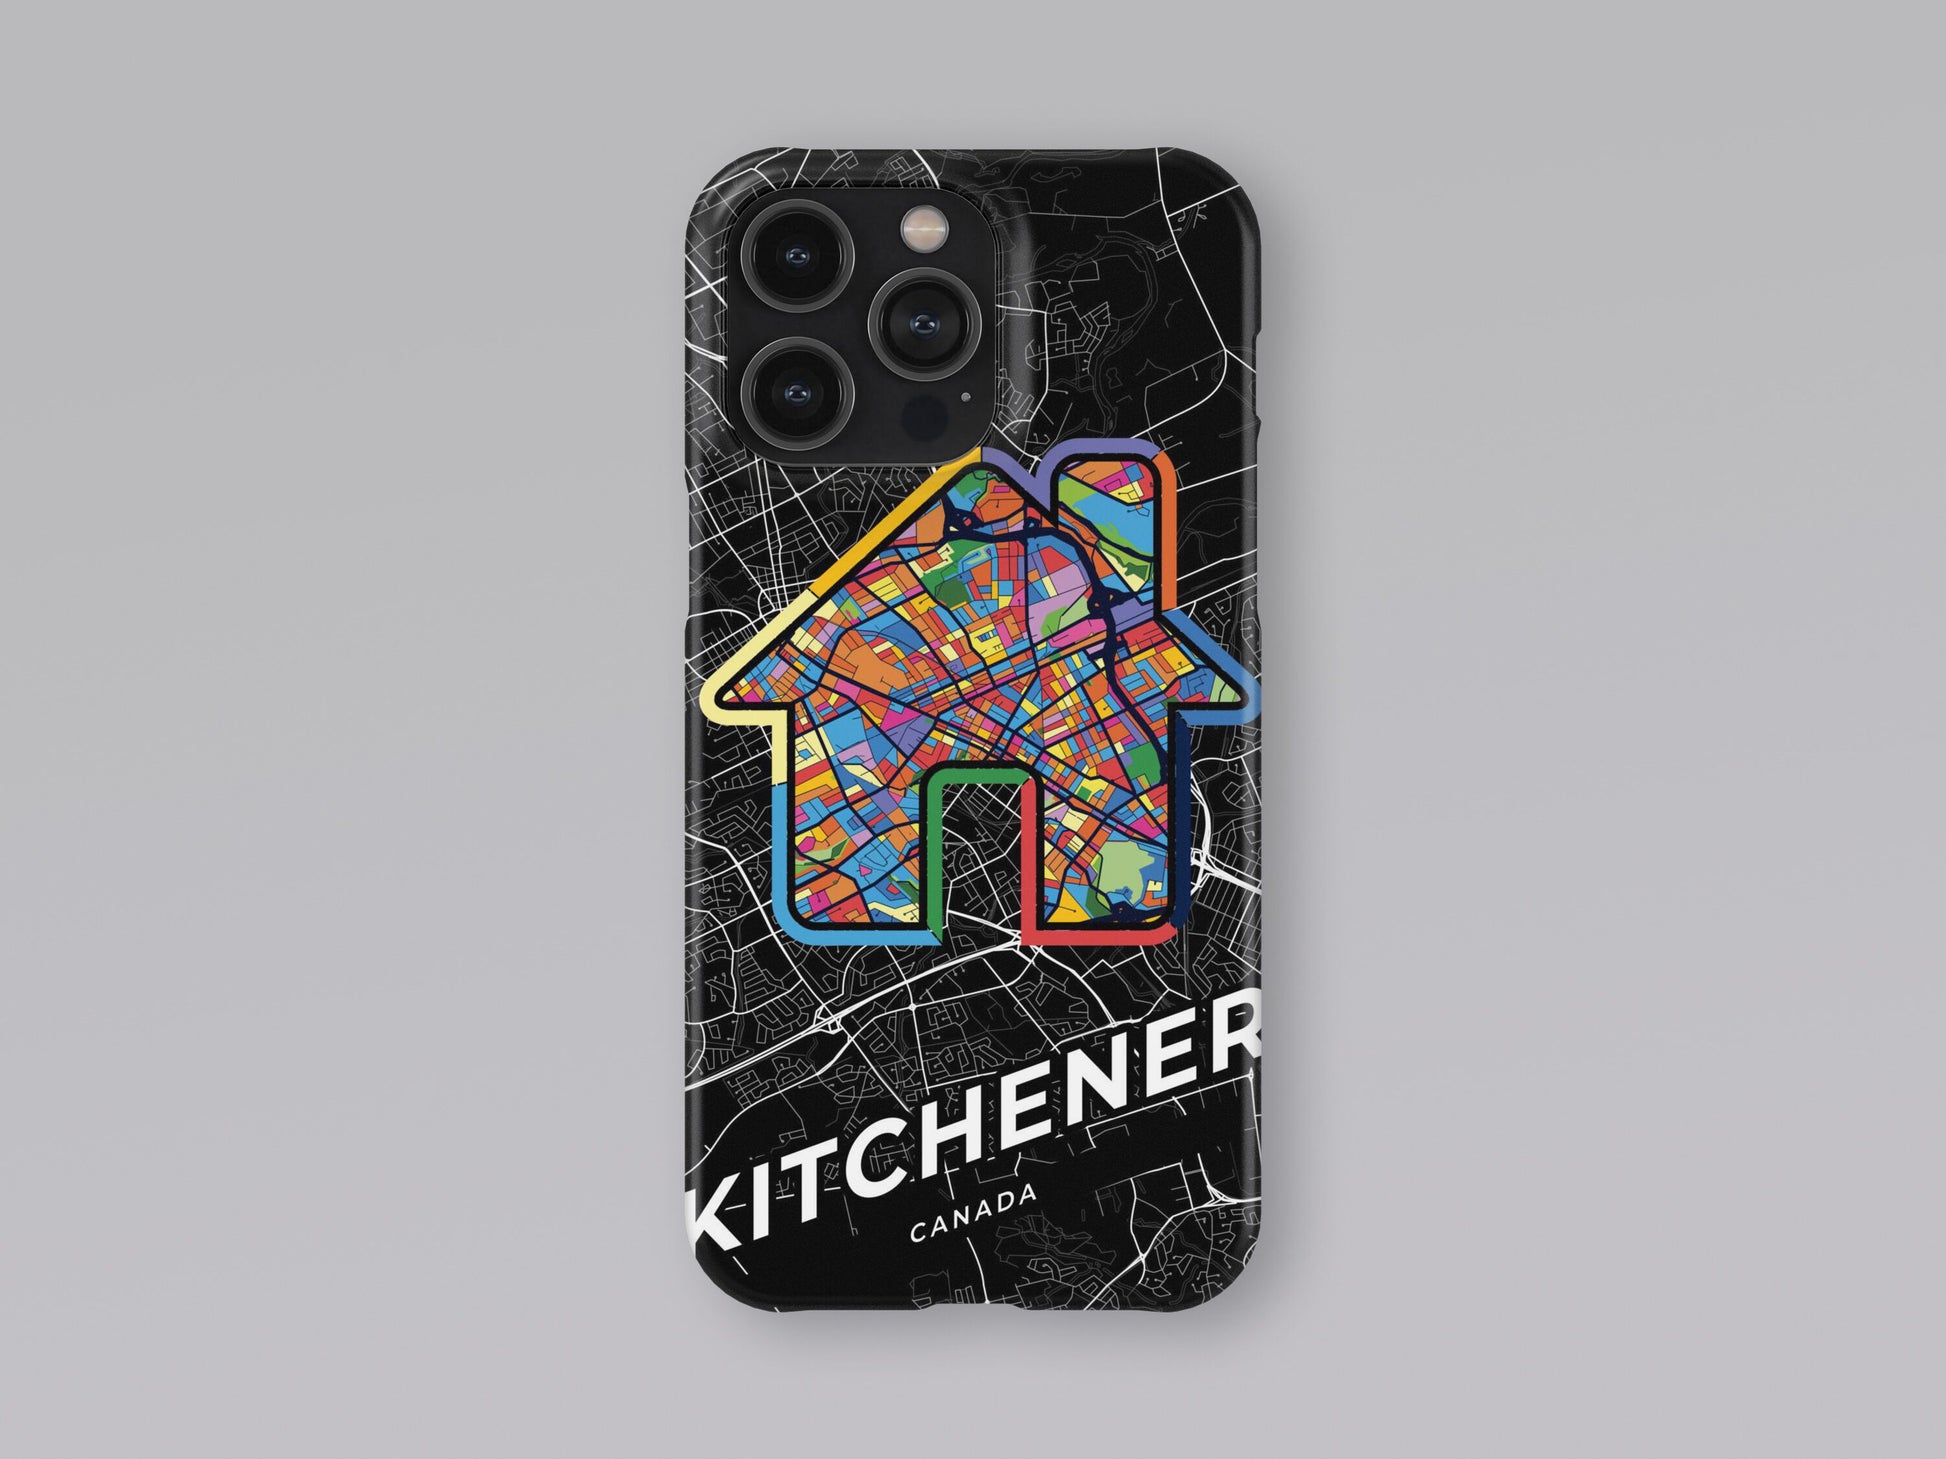 Kitchener Canada slim phone case with colorful icon. Birthday, wedding or housewarming gift. Couple match cases. 3